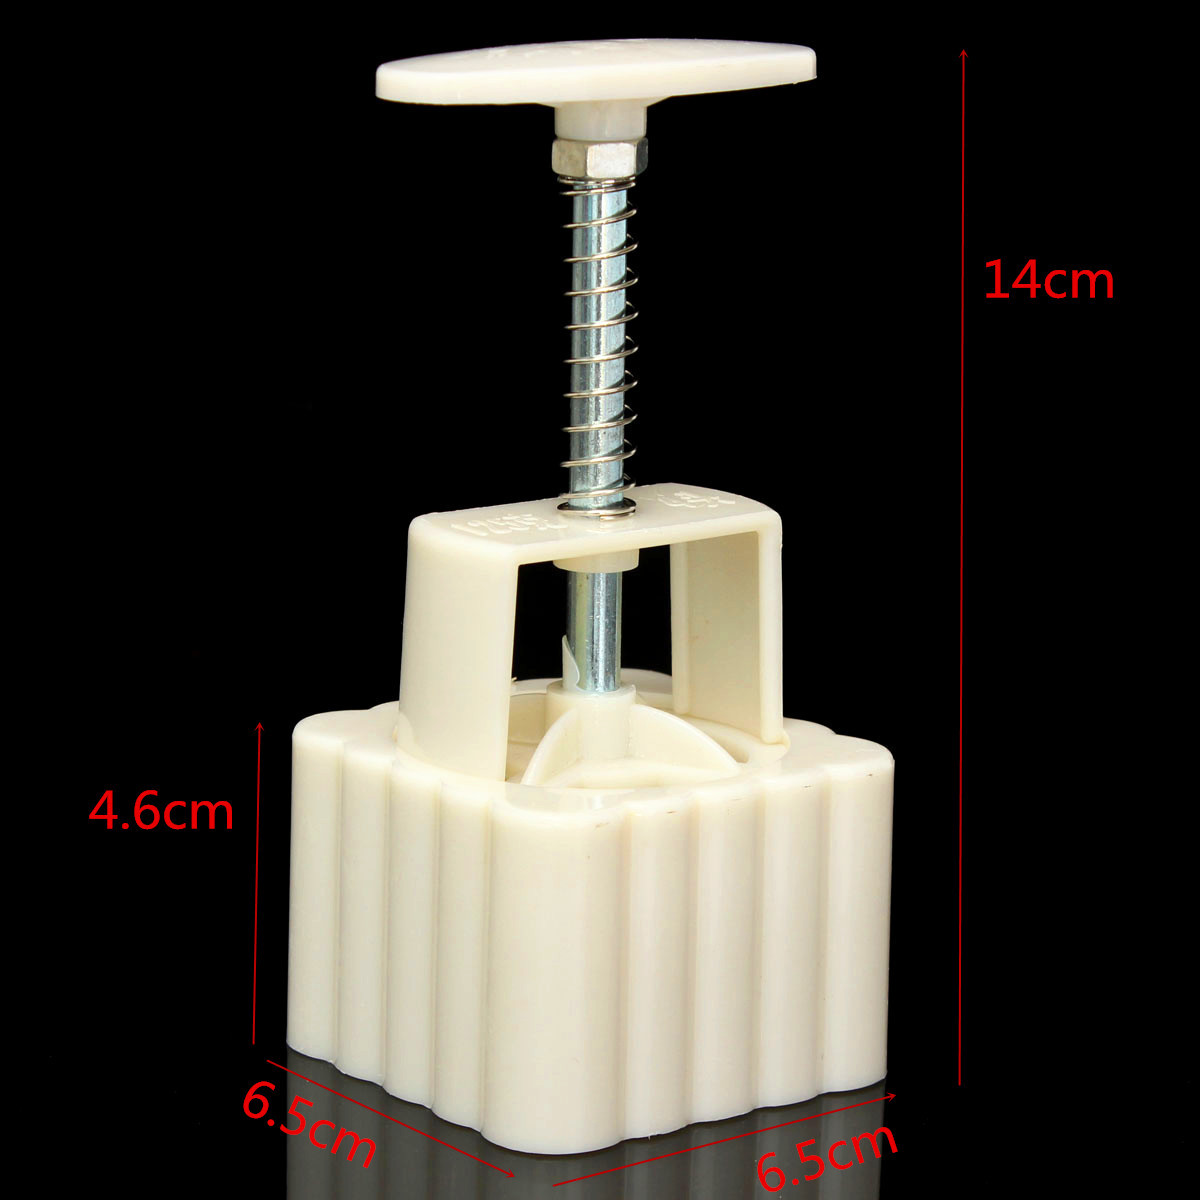 Square-125g-Moonake-Baking-Mooncake-Pastry-Mold-Biscuit-Cake-Hand-Press-Mould-Flower-Cooking-DIY-1339040